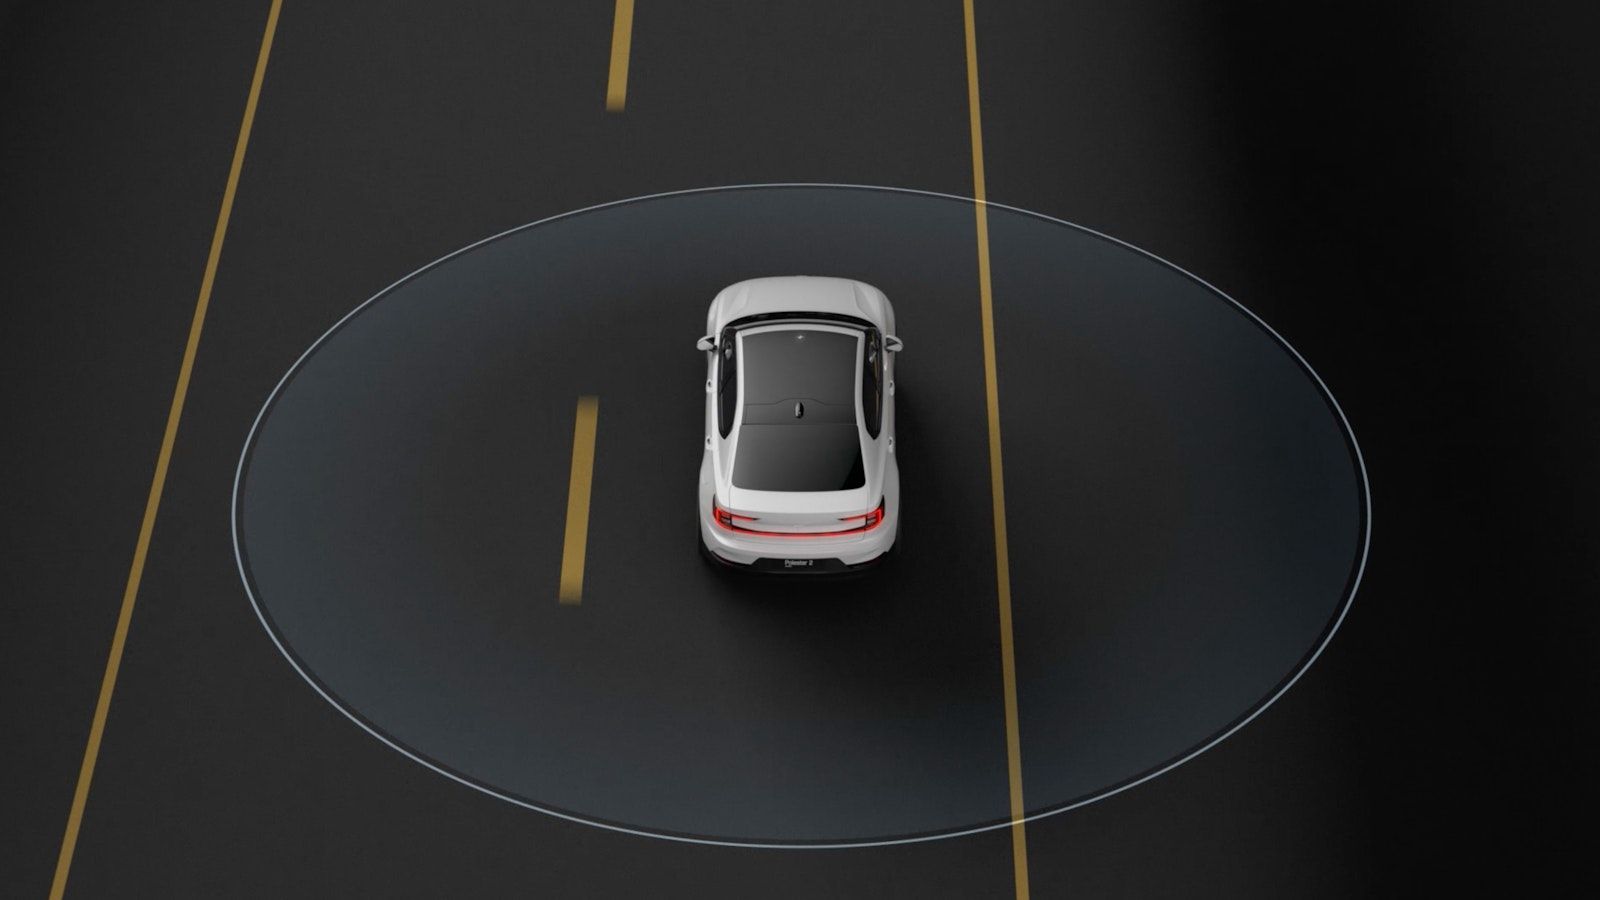 Animation of Polestar 2 on road with 360º camera visibility